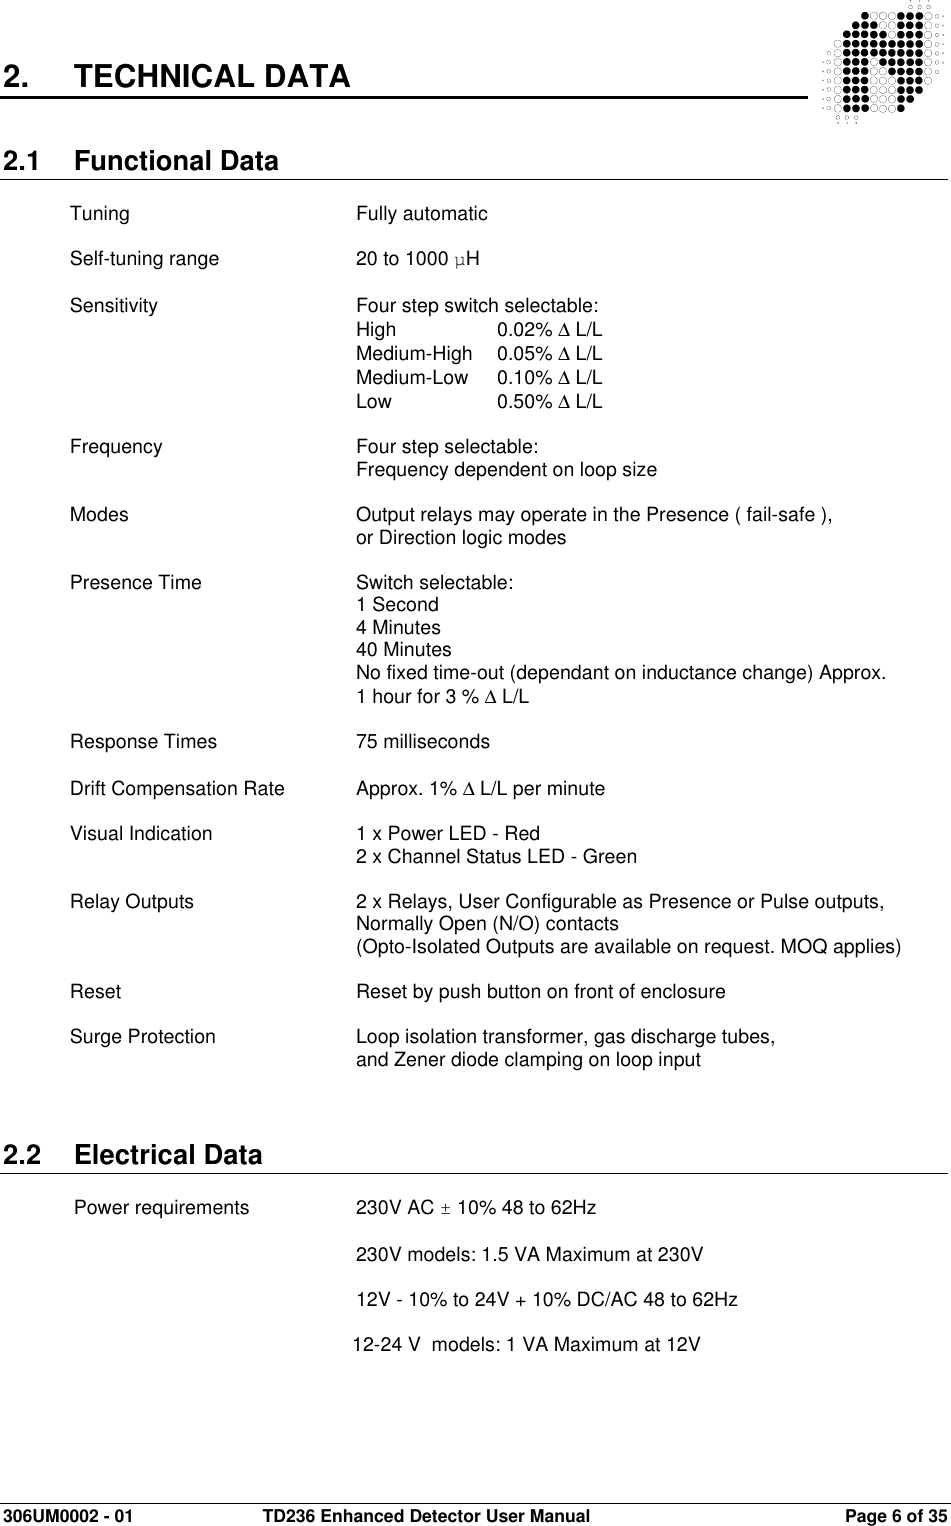  306UM0002 - 01  TD236 Enhanced Detector User Manual   Page 6 of 35  2.  TECHNICAL DATA   2.1  Functional Data  Tuning        Fully automatic  Self-tuning range    20 to 1000 µH  Sensitivity      Four step switch selectable:          High     0.02% ∆ L/L          Medium-High  0.05% ∆ L/L          Medium-Low  0.10% ∆ L/L          Low    0.50% ∆ L/L  Frequency      Four step selectable:          Frequency dependent on loop size  Modes        Output relays may operate in the Presence ( fail-safe ),          or Direction logic modes  Presence Time      Switch selectable:          1 Second          4 Minutes         40 Minutes          No fixed time-out (dependant on inductance change) Approx.  1 hour for 3 % ∆ L/L  Response Times    75 milliseconds  Drift Compensation Rate   Approx. 1% ∆ L/L per minute  Visual Indication     1 x Power LED - Red          2 x Channel Status LED - Green  Relay Outputs      2 x Relays, User Configurable as Presence or Pulse outputs,  Normally Open (N/O) contacts (Opto-Isolated Outputs are available on request. MOQ applies)  Reset        Reset by push button on front of enclosure  Surge Protection    Loop isolation transformer, gas discharge tubes,   and Zener diode clamping on loop input    2.2  Electrical Data   Power requirements    230V AC ± 10% 48 to 62Hz            230V models: 1.5 VA Maximum at 230V  12V - 10% to 24V + 10% DC/AC 48 to 62Hz           12-24 V  models: 1 VA Maximum at 12V            